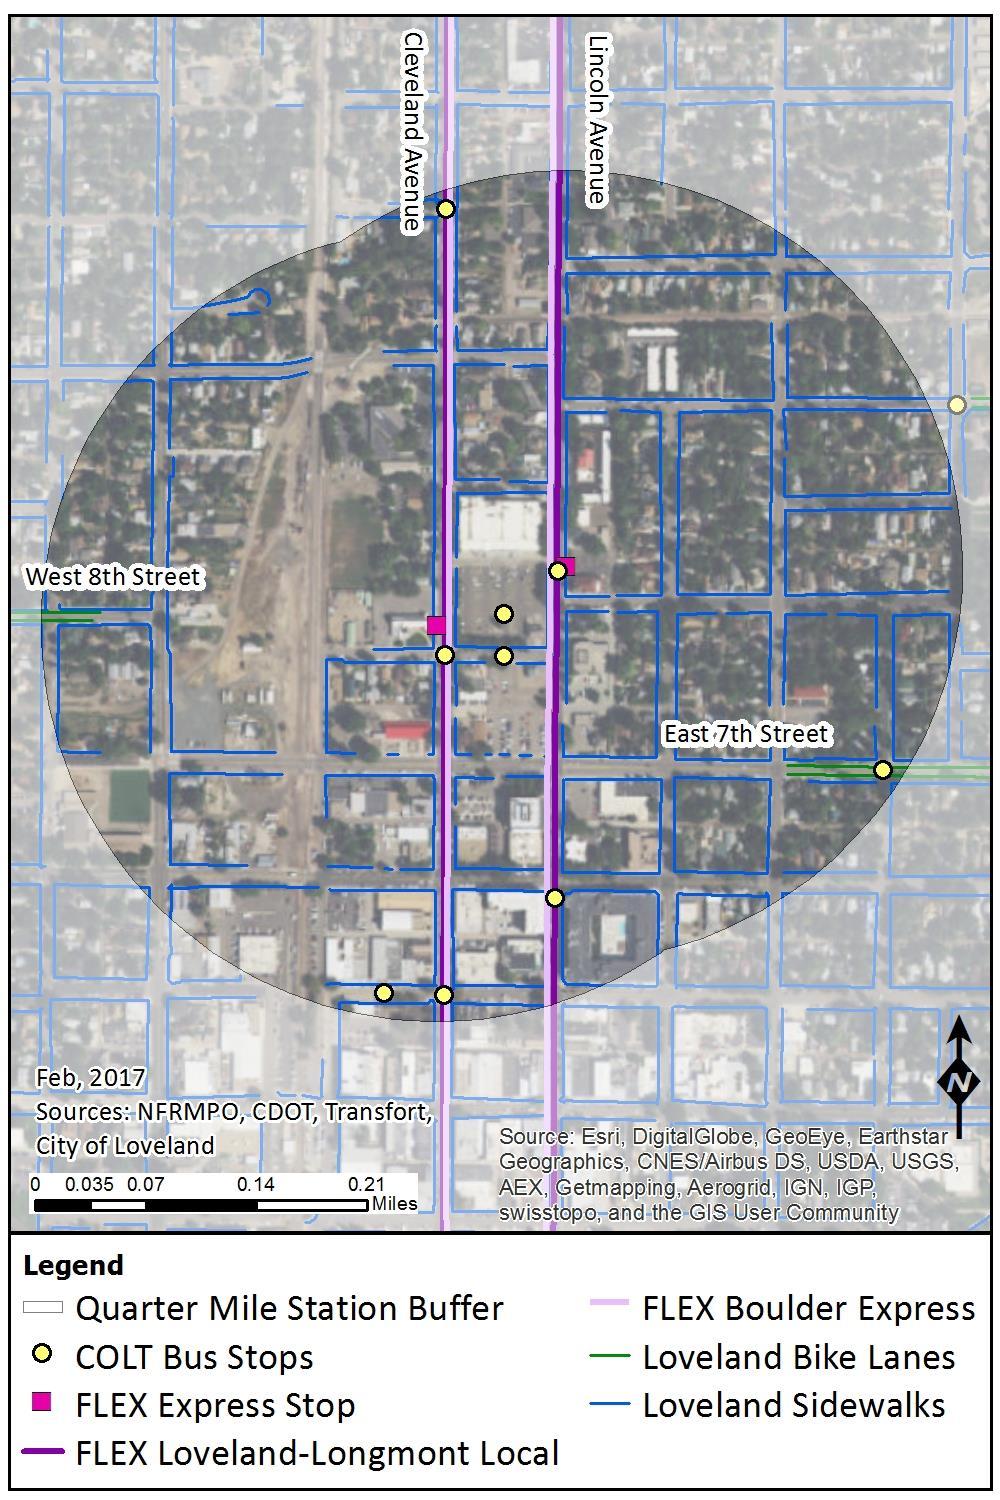 Figure 3-11 shows the non-motorized infrastructure available near the 8 th Street stop pair.